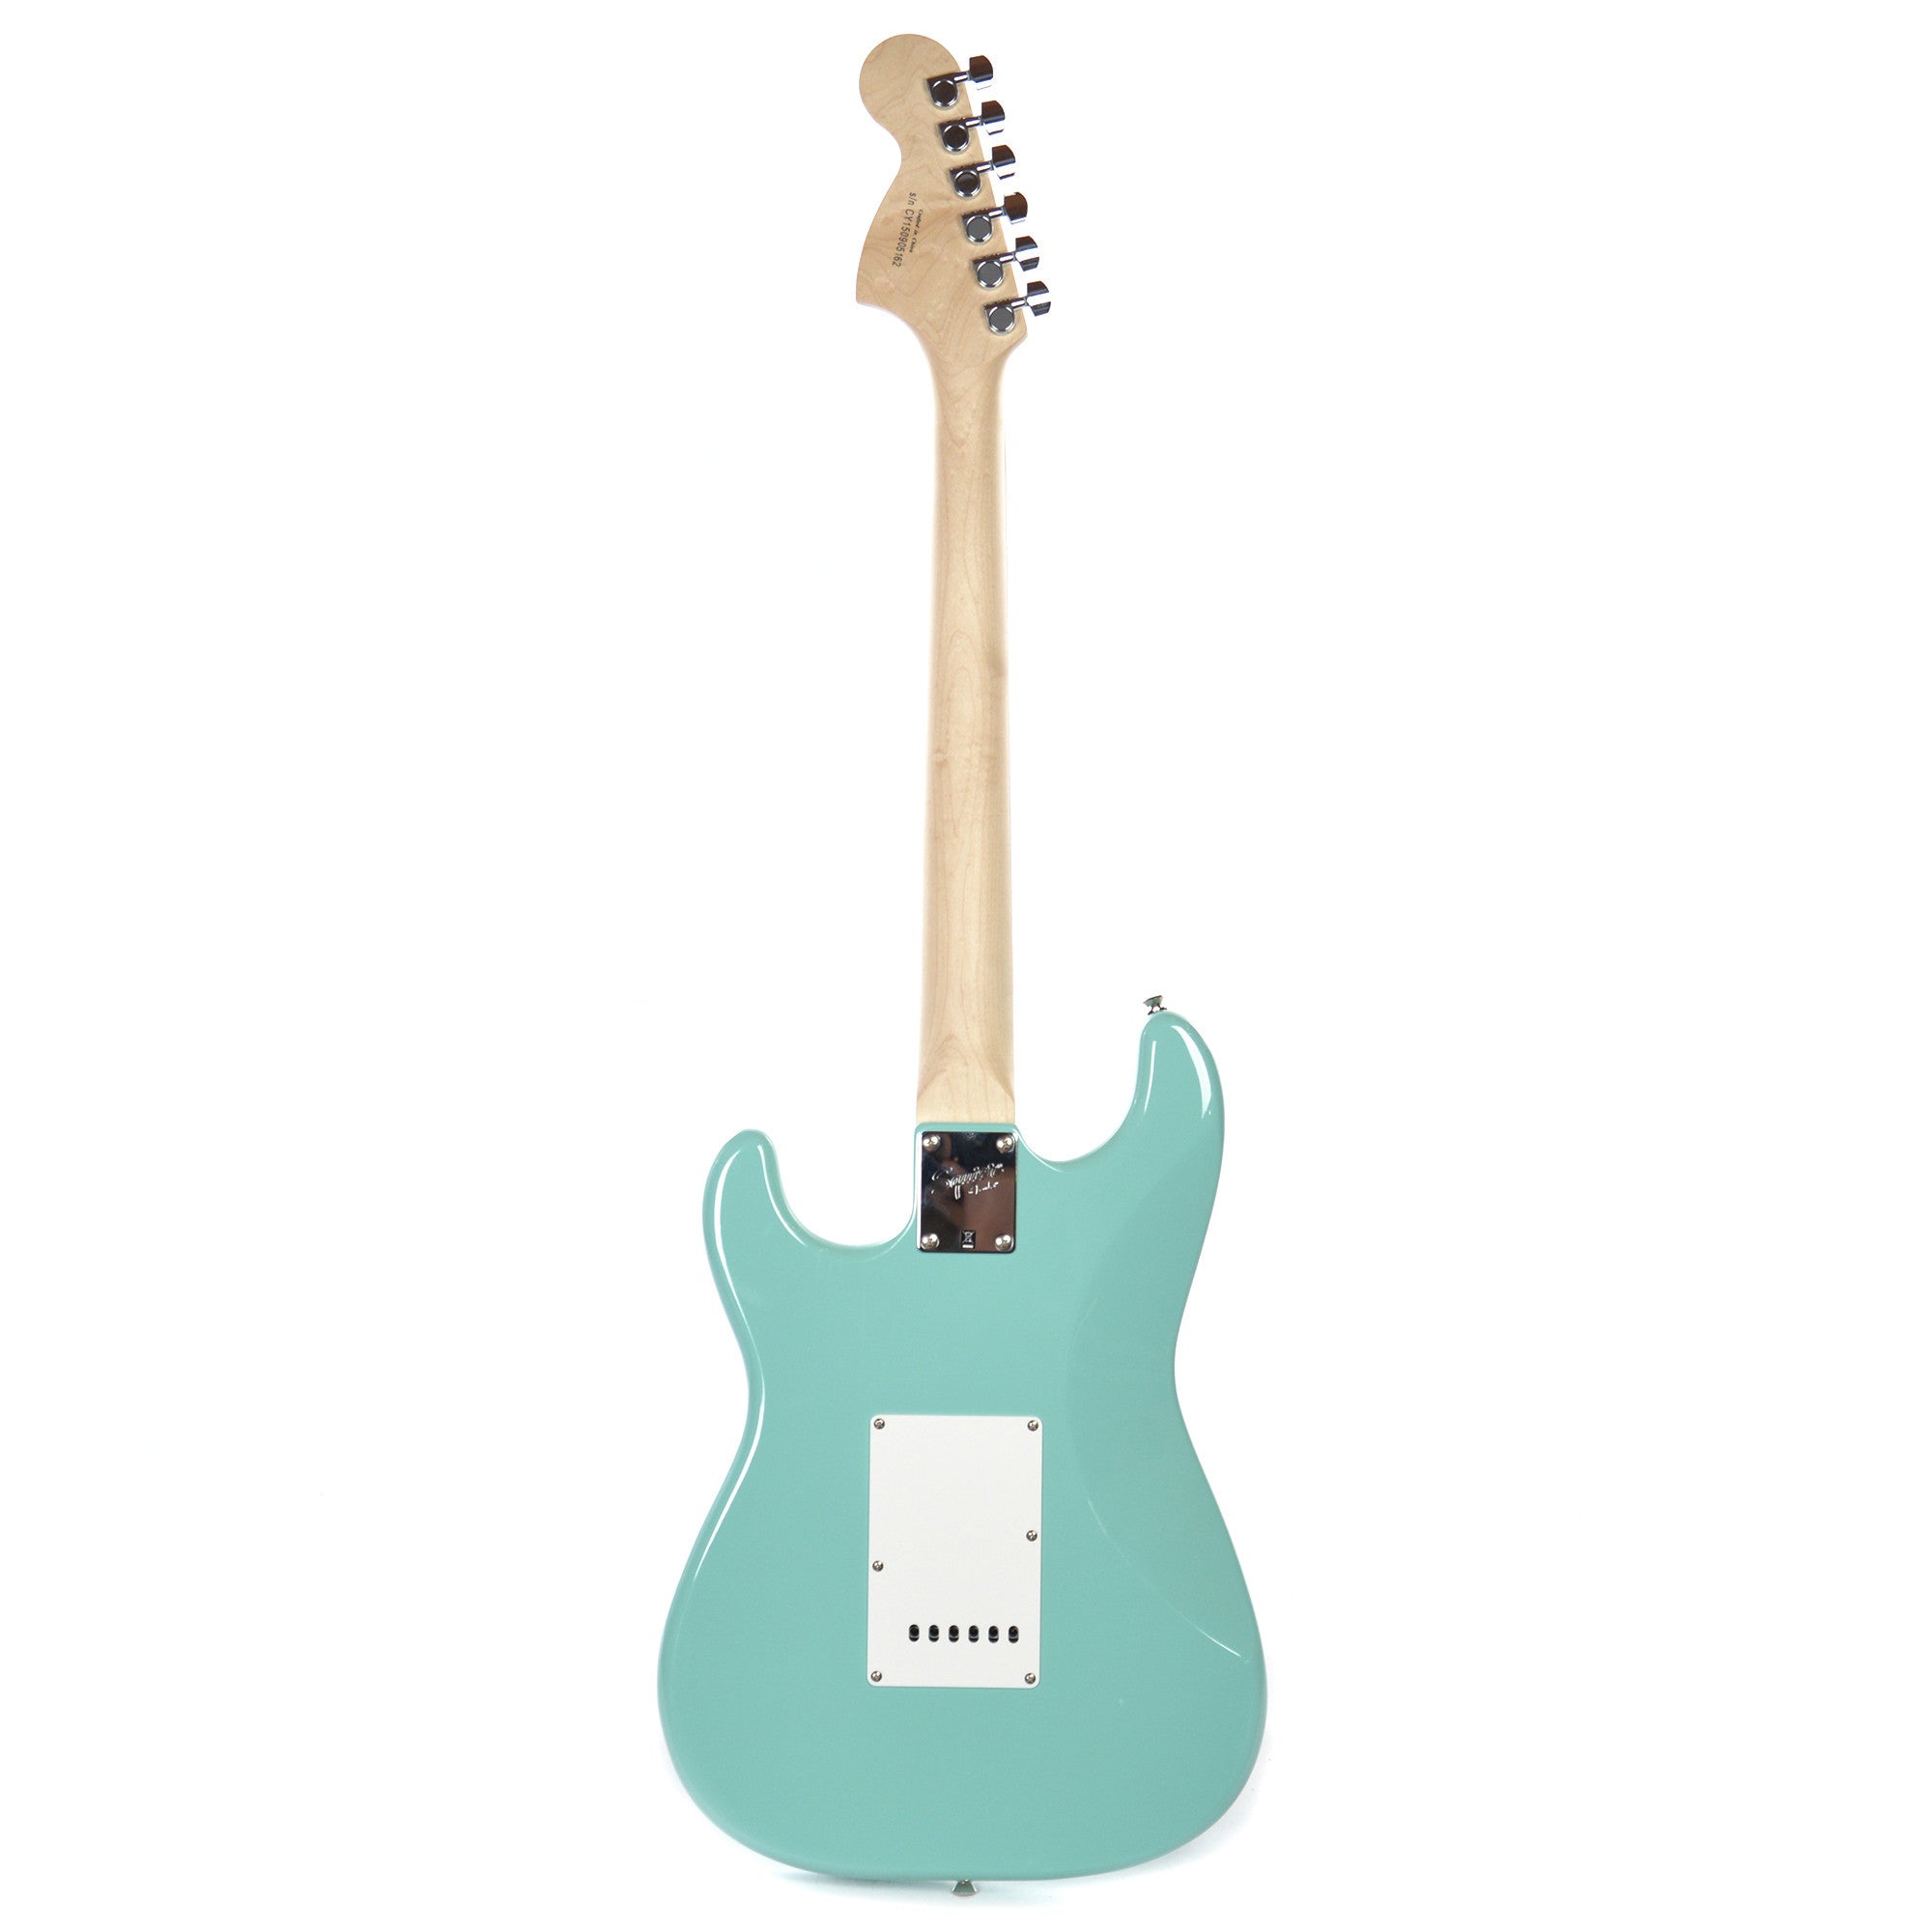 Squier Affinity Stratocaster Surf Green | Chicago Music Exchange